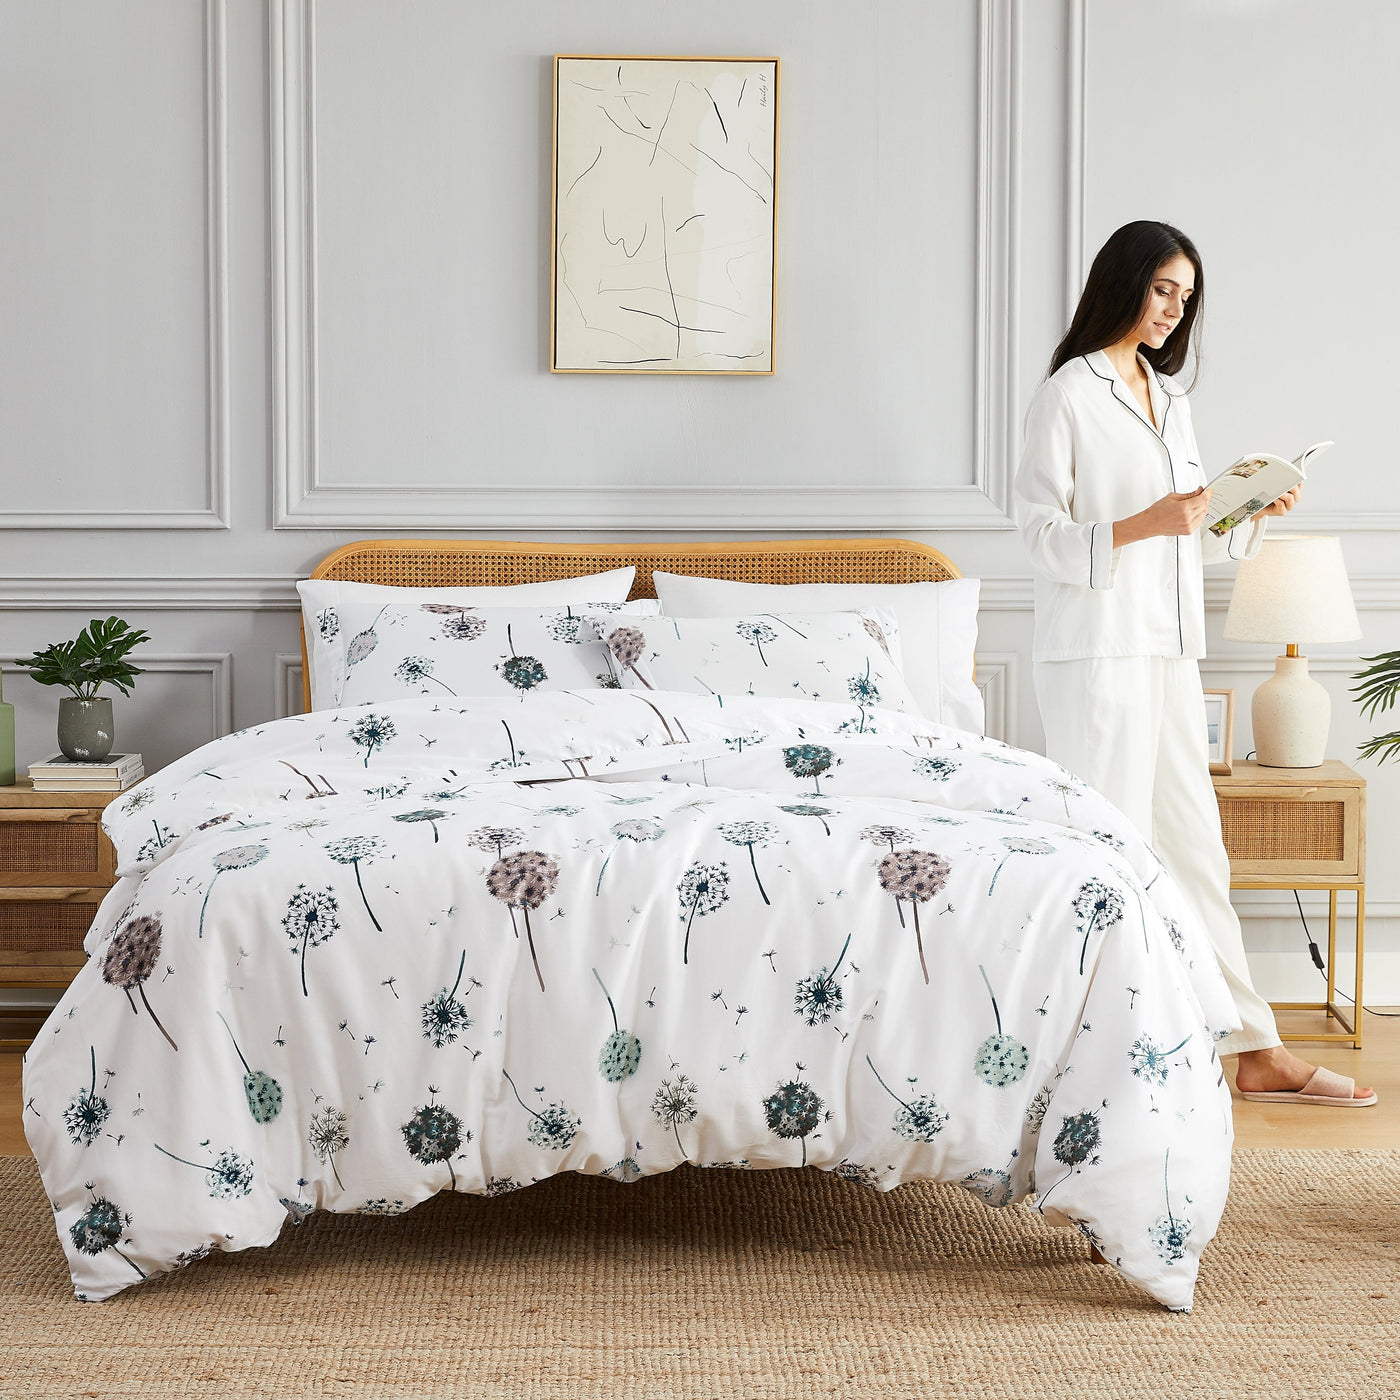 Lady reading a book next to Dandelion Dreams Duvet Cover in White#color_dandelion-white